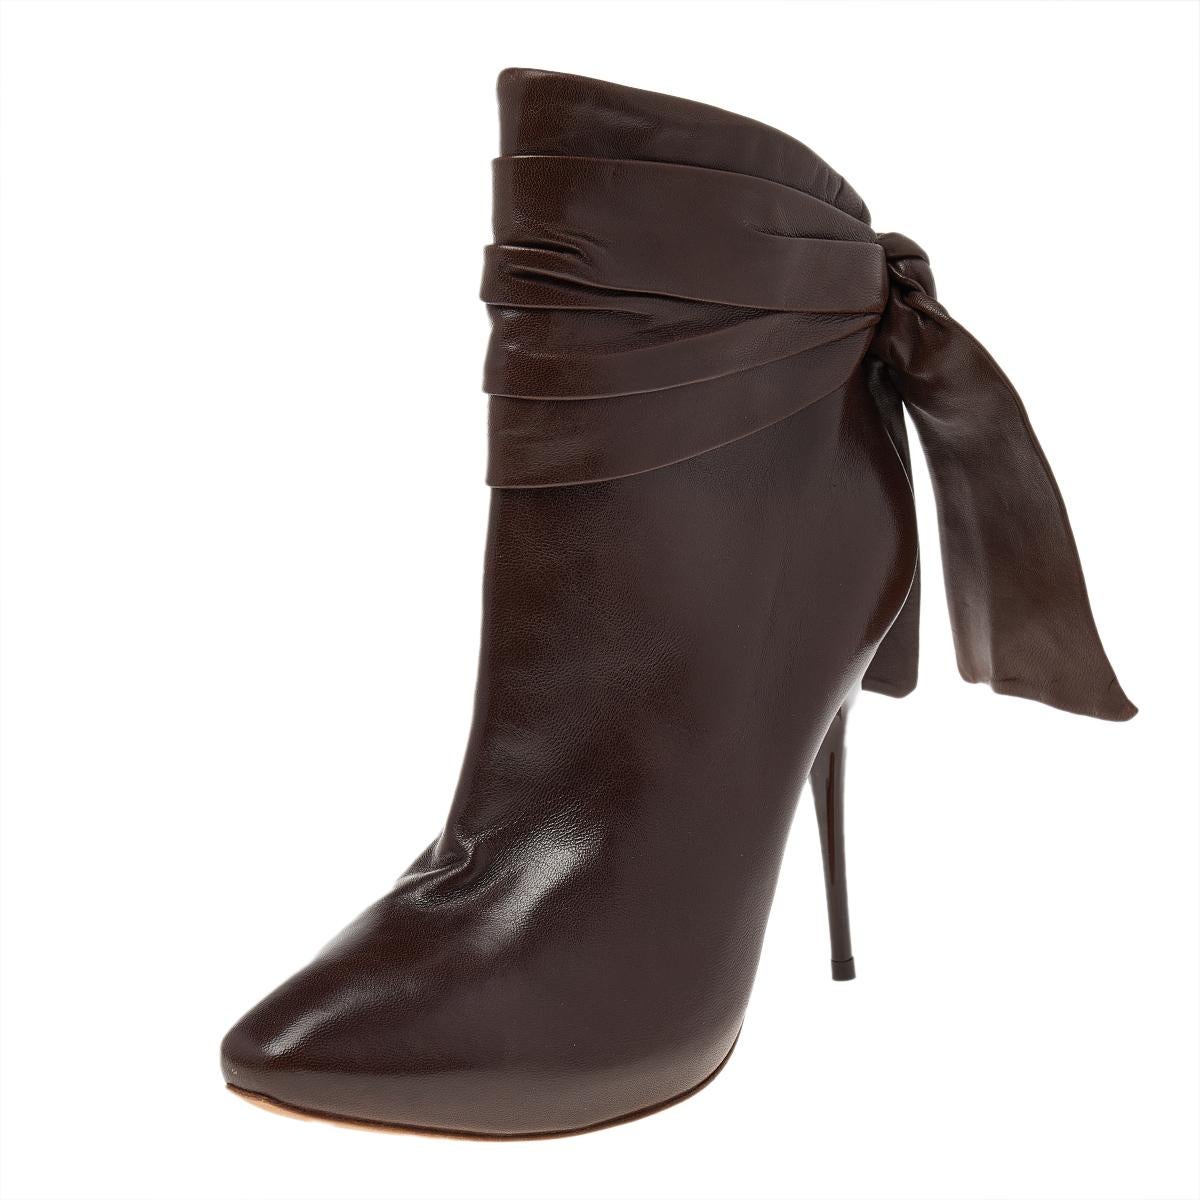 Alexander McQueen Brown Leather Knotted Ankle Boots Size 38 1